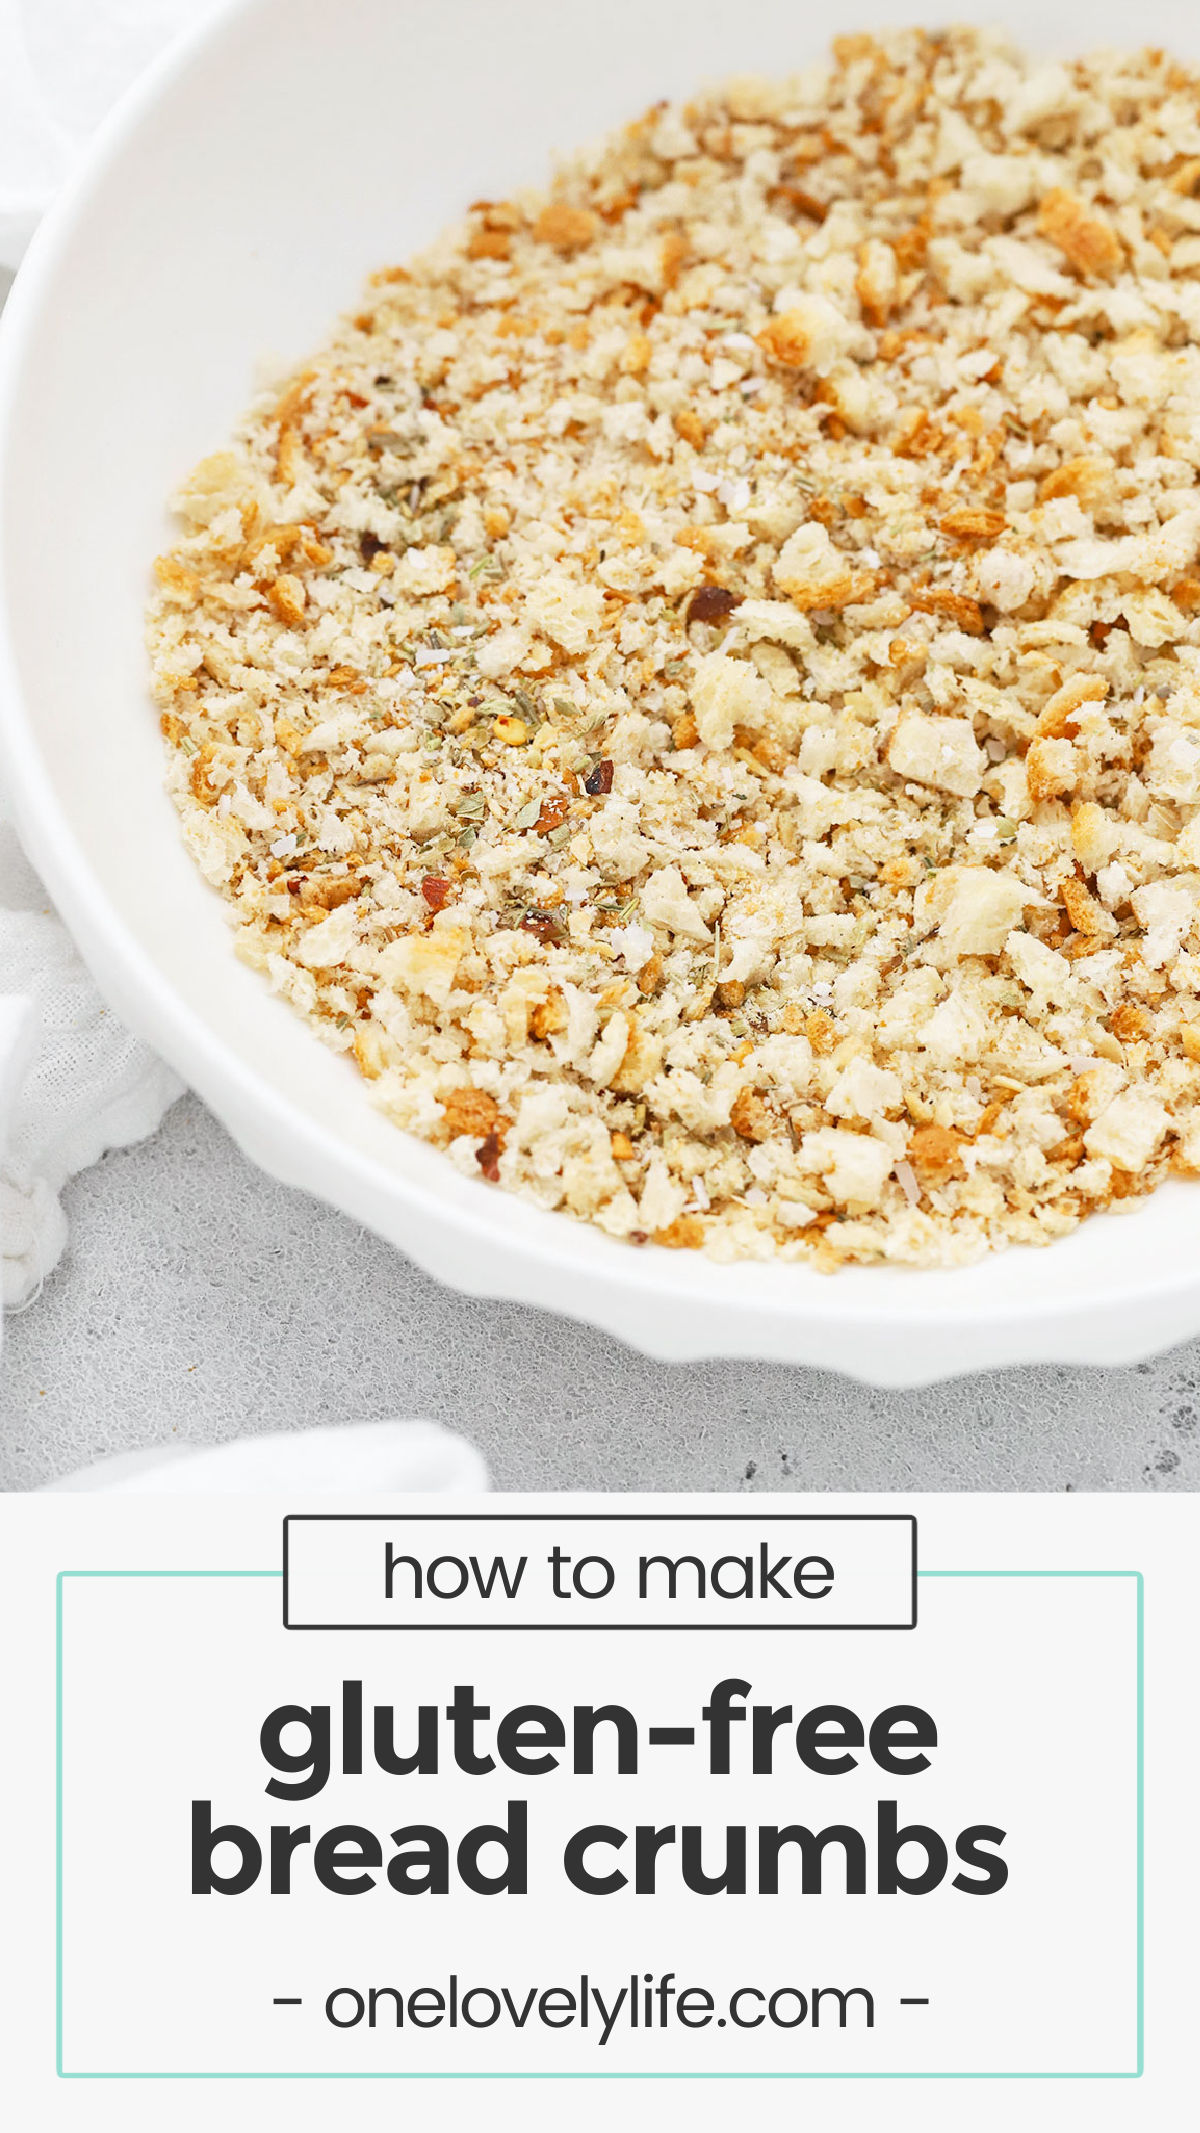 How to make homemade gluten-free bread crumbs. These gluten-free breadcrumbs are perfect for meatballs, meatloaf, or crispy chicken! / homemade gluten free breadcrumbs recipe / gluten-free italian bread crumbs / gluten free italian breadcrumbs / gluten-free bread crumbs recipe / homemade gluten-free panko recipe / gluten-free bread crumb recipe / how to make breadcrumbs / gluten-free panko bread crumbs / gluten-free panko breadcrumbs / gluten free crumb coating / gluten free crispy coating